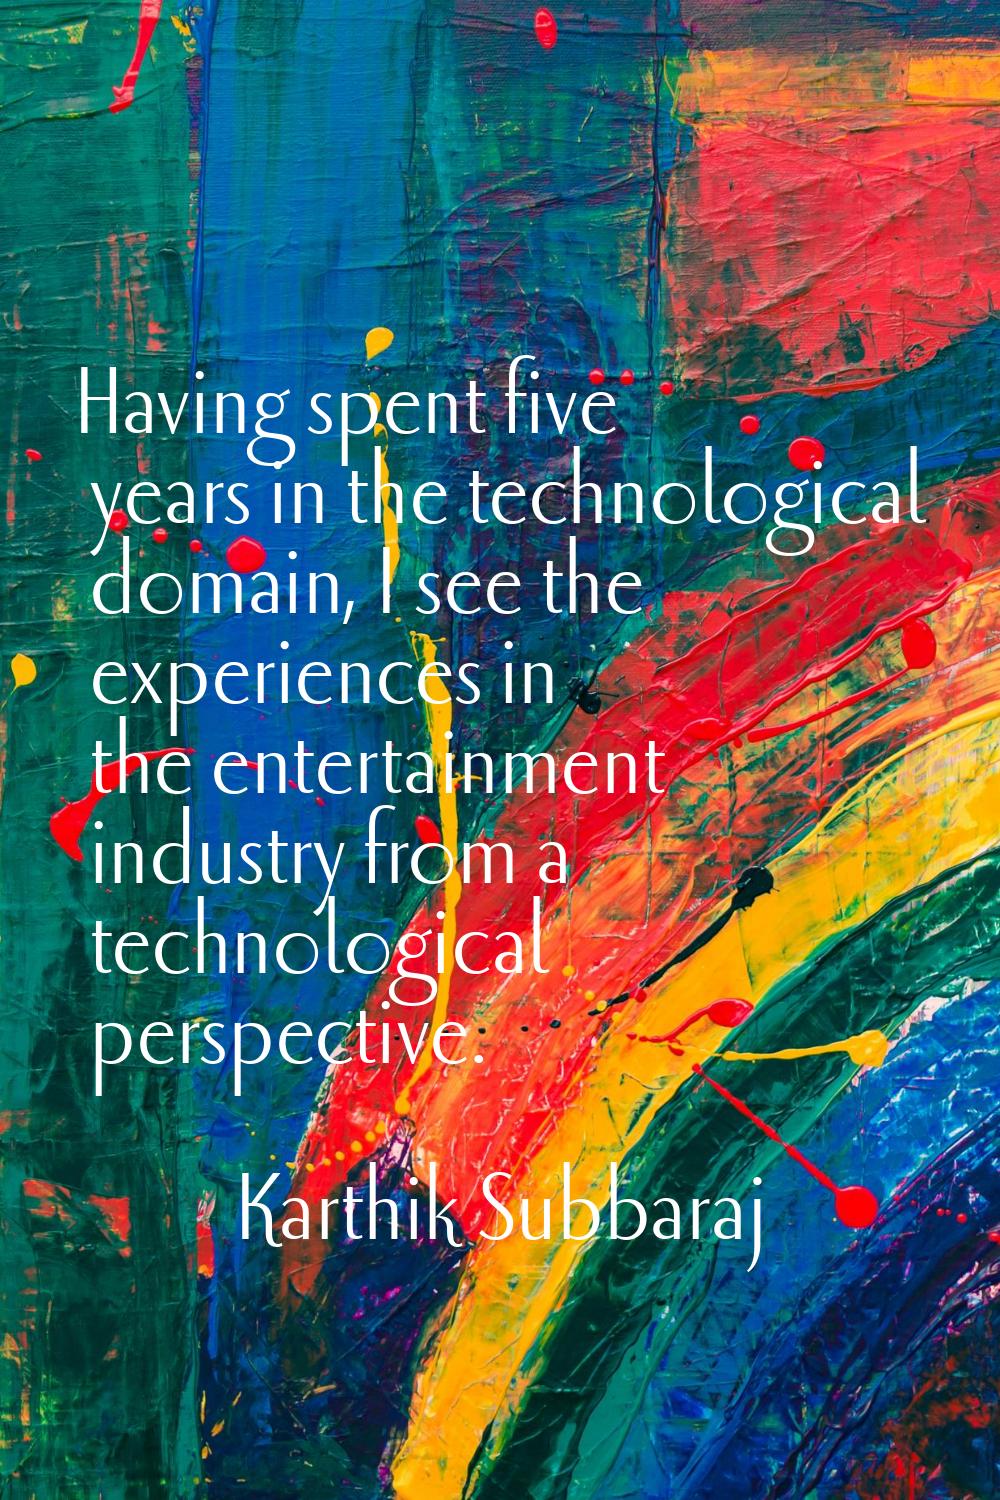 Having spent five years in the technological domain, I see the experiences in the entertainment ind